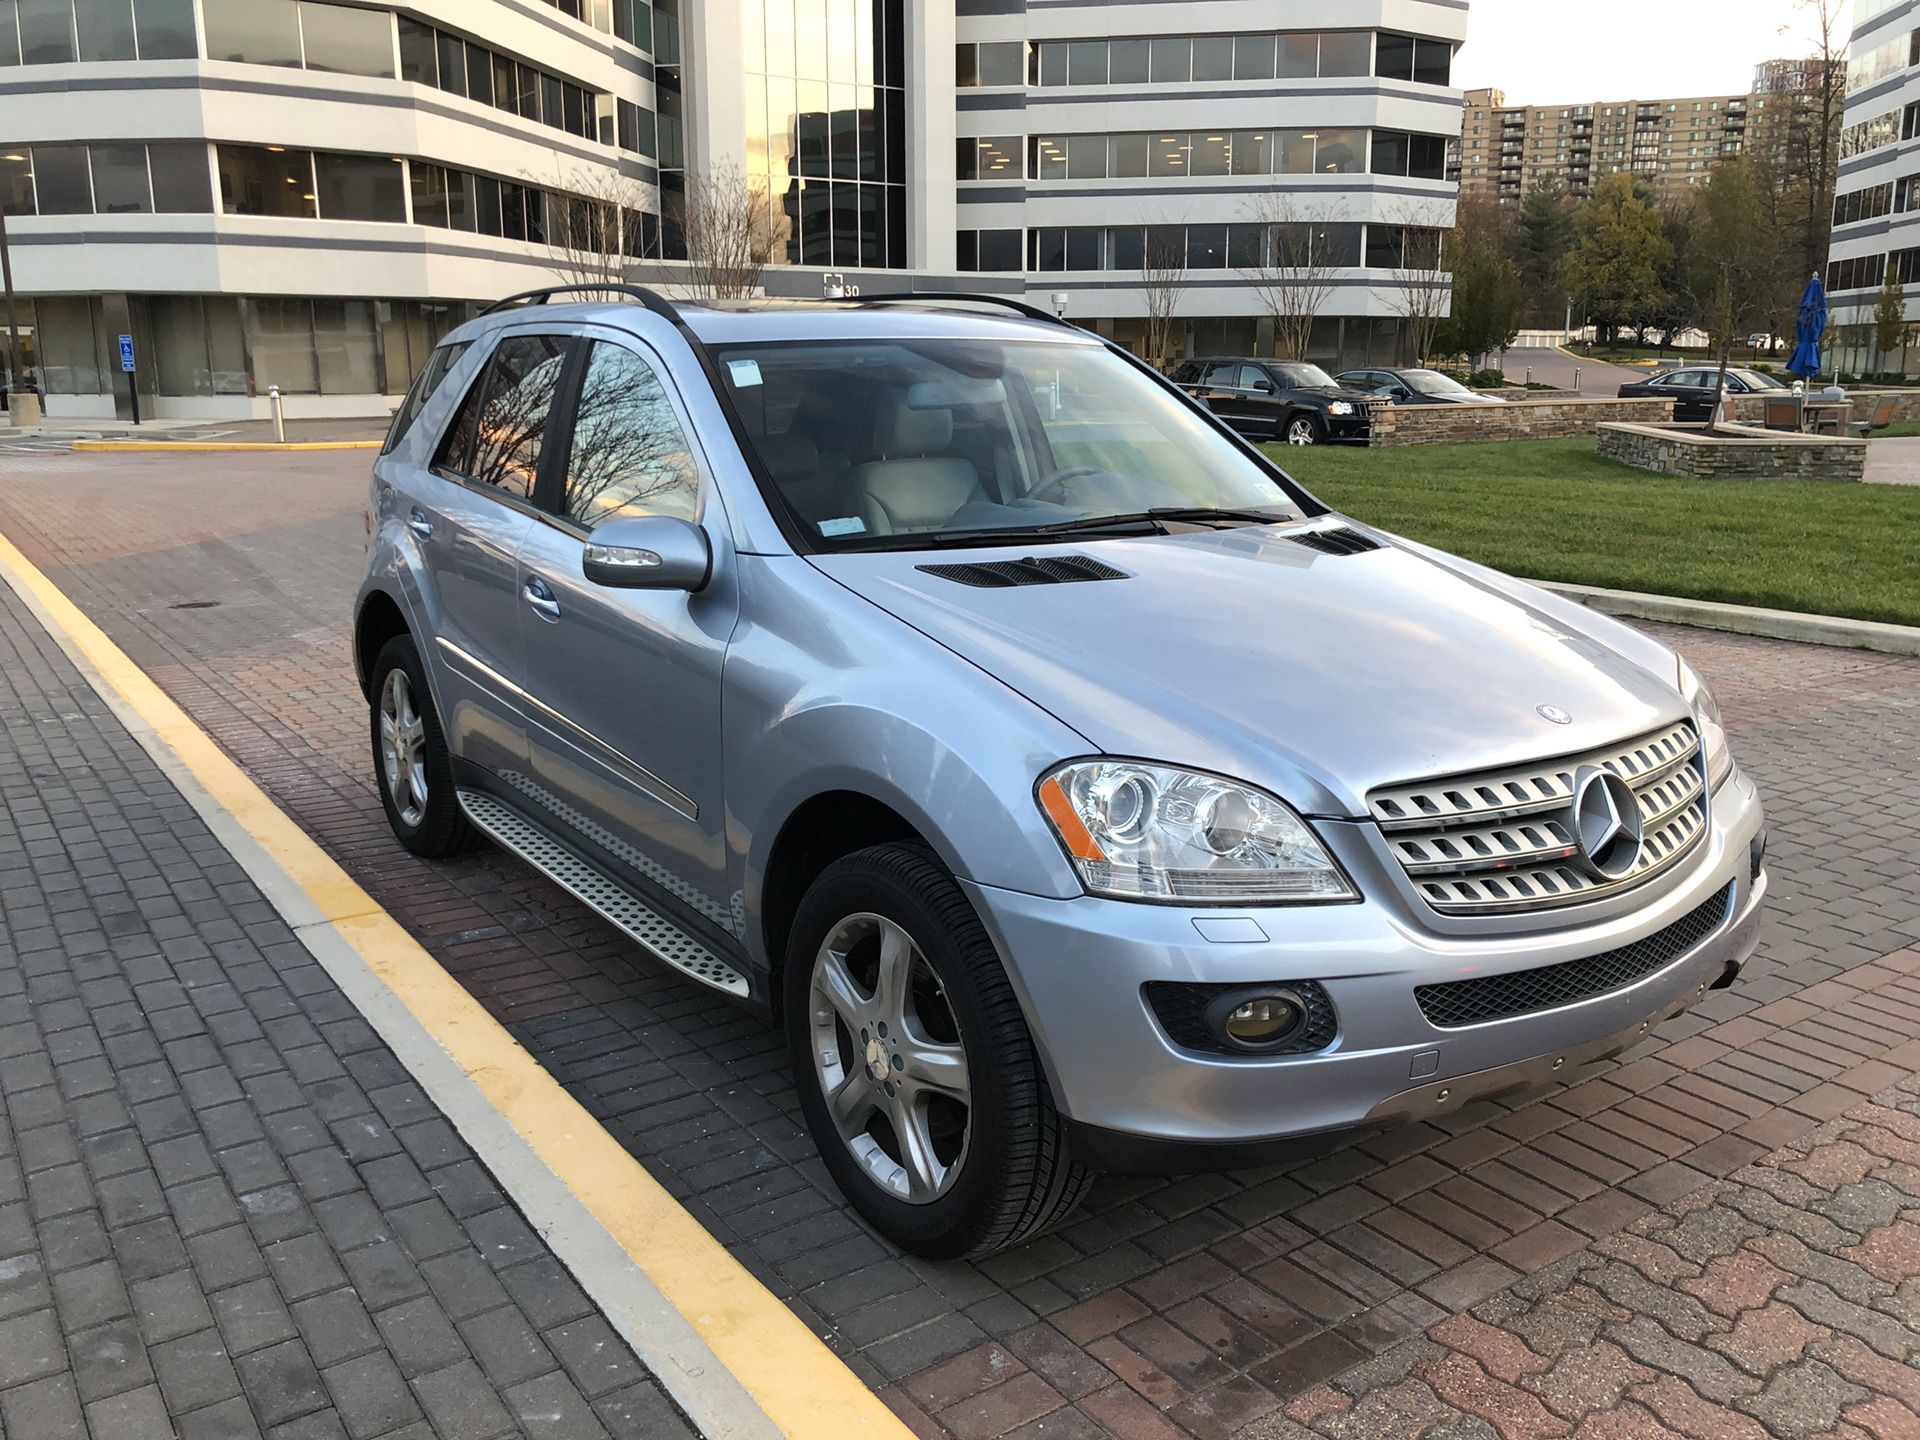 2008 Mercedes Benz ML350 , 4MATIC, Auto, Front and Rear AC, GPS, Bluetooth, Leather Seats, Heated Seats, Power Seats, Running Boards, Am/FM, CD, Tent